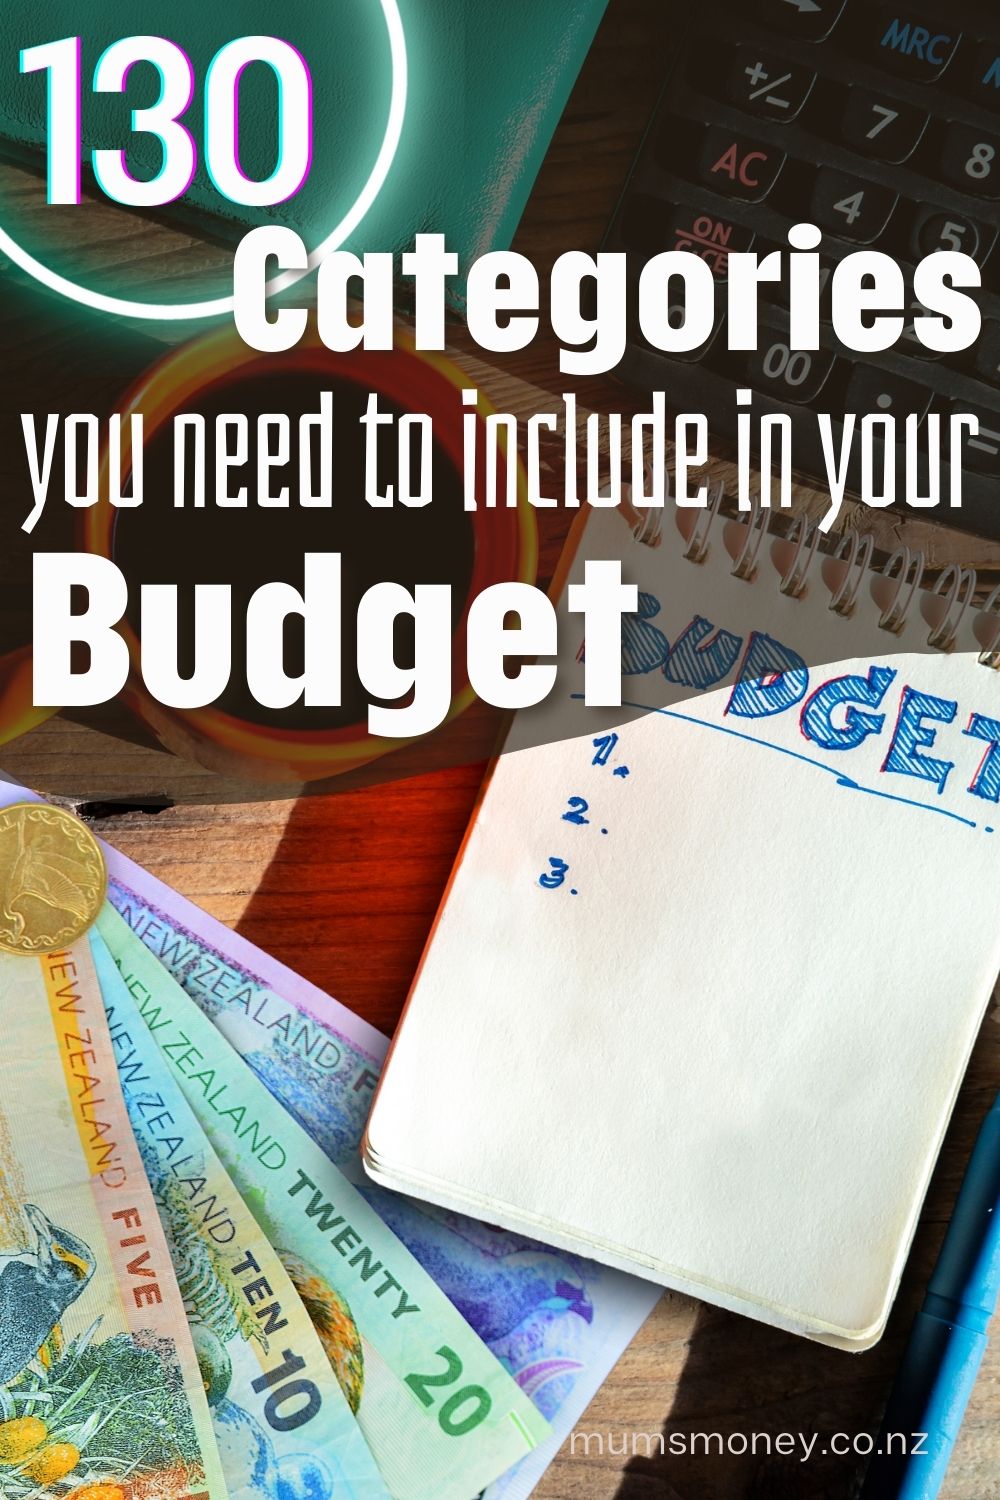 udget Categories to Include in Your Planning Pin Image